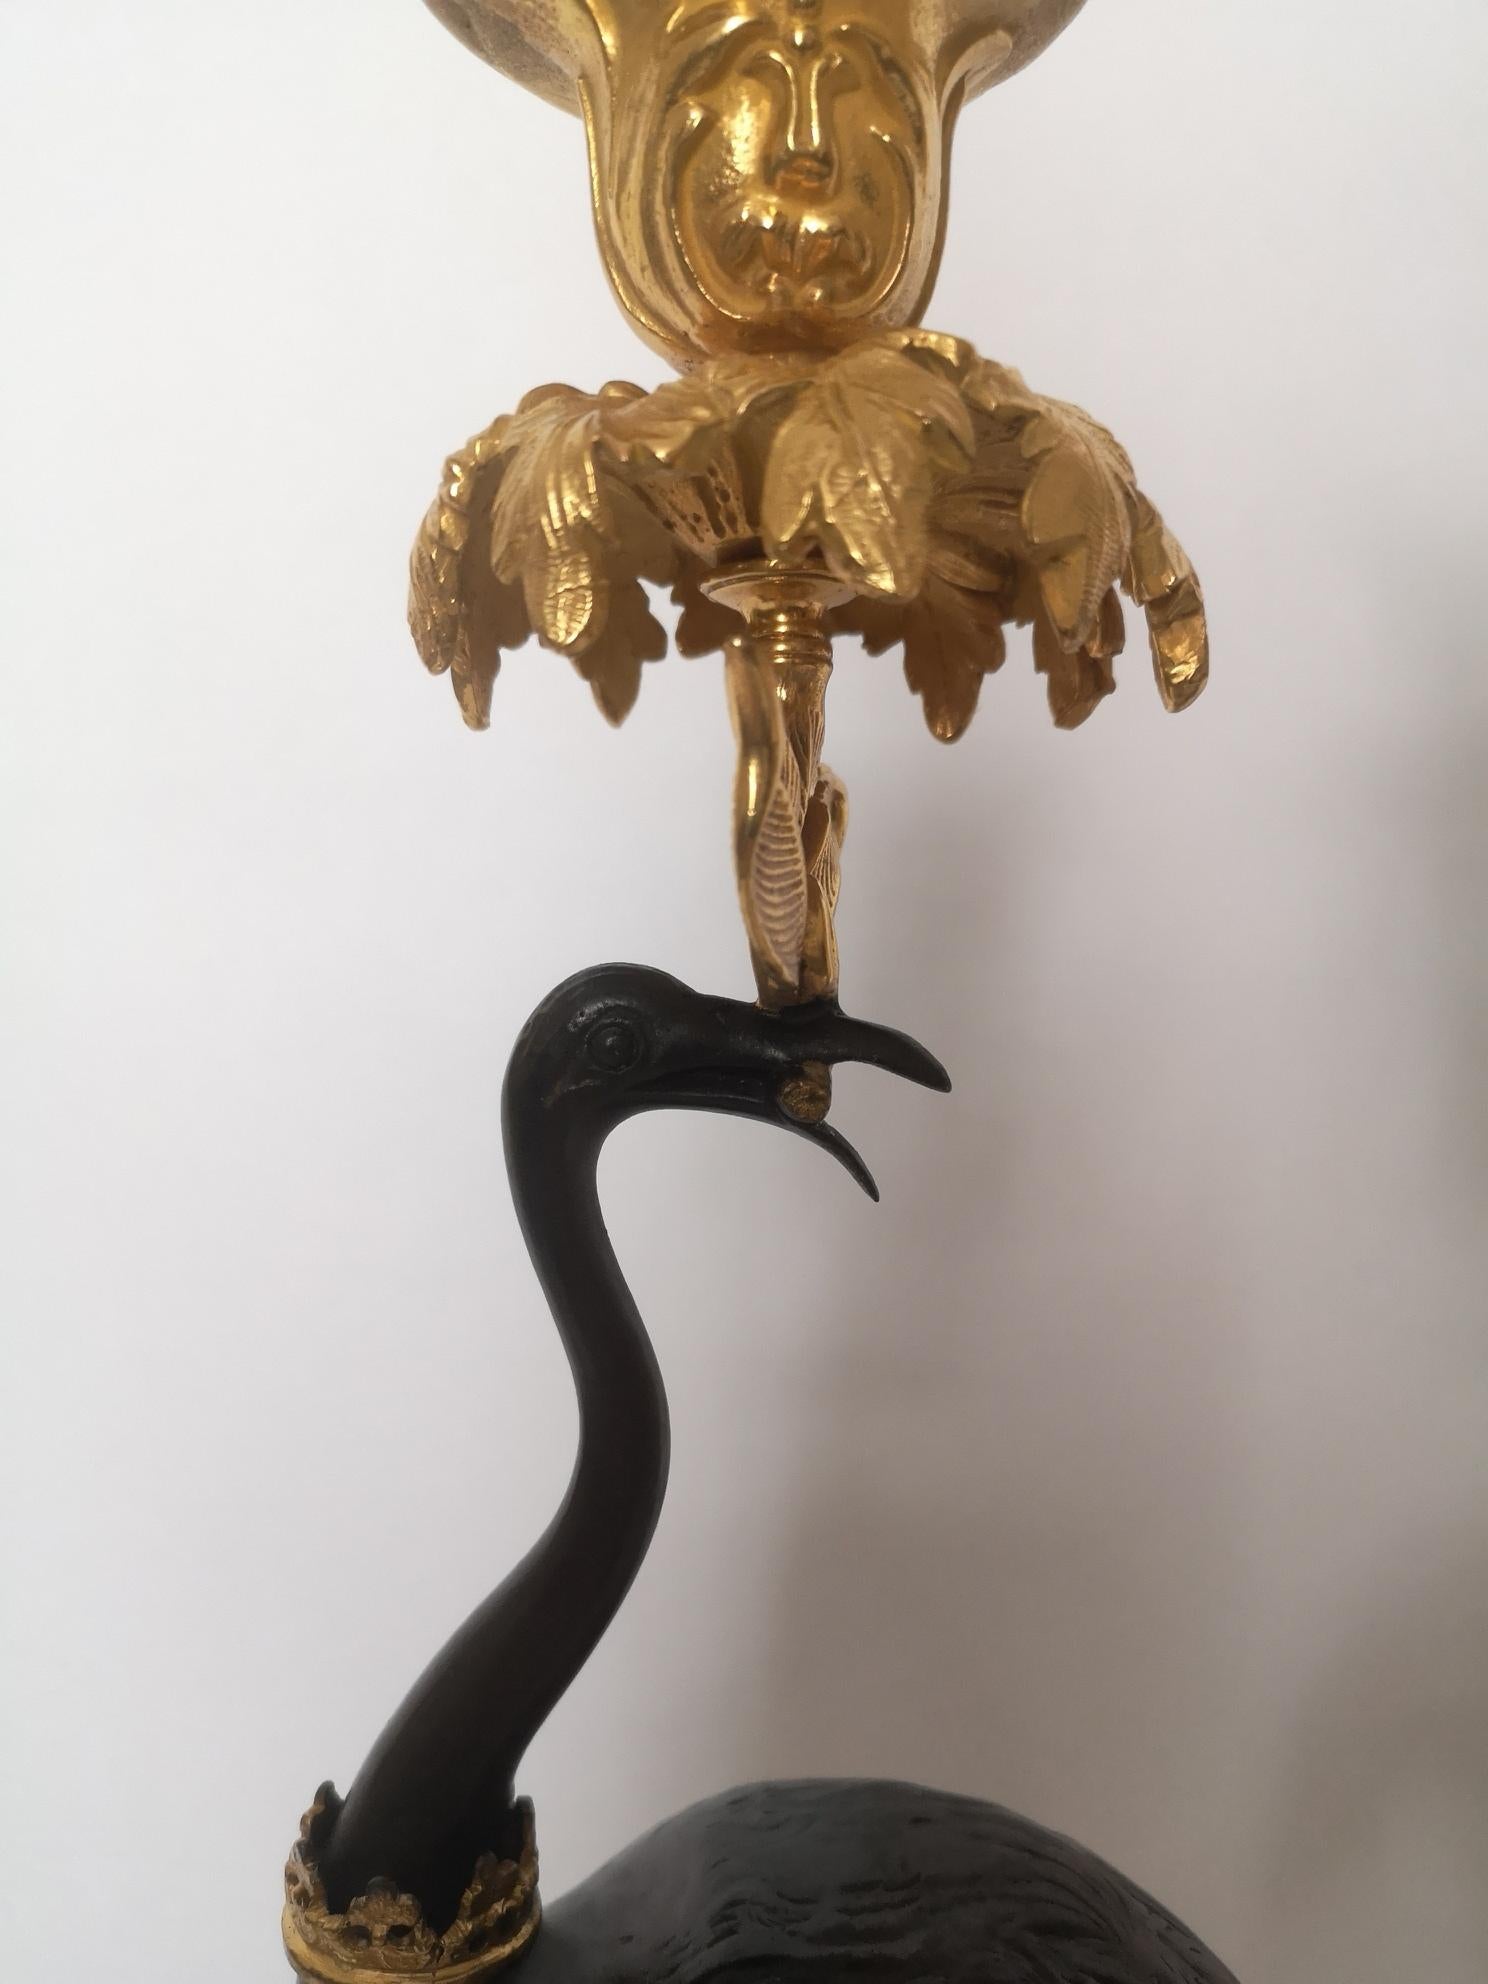 Pair of Early 19th Century English Bronze and Gilt Stork Candlesticks by Abbot For Sale 4